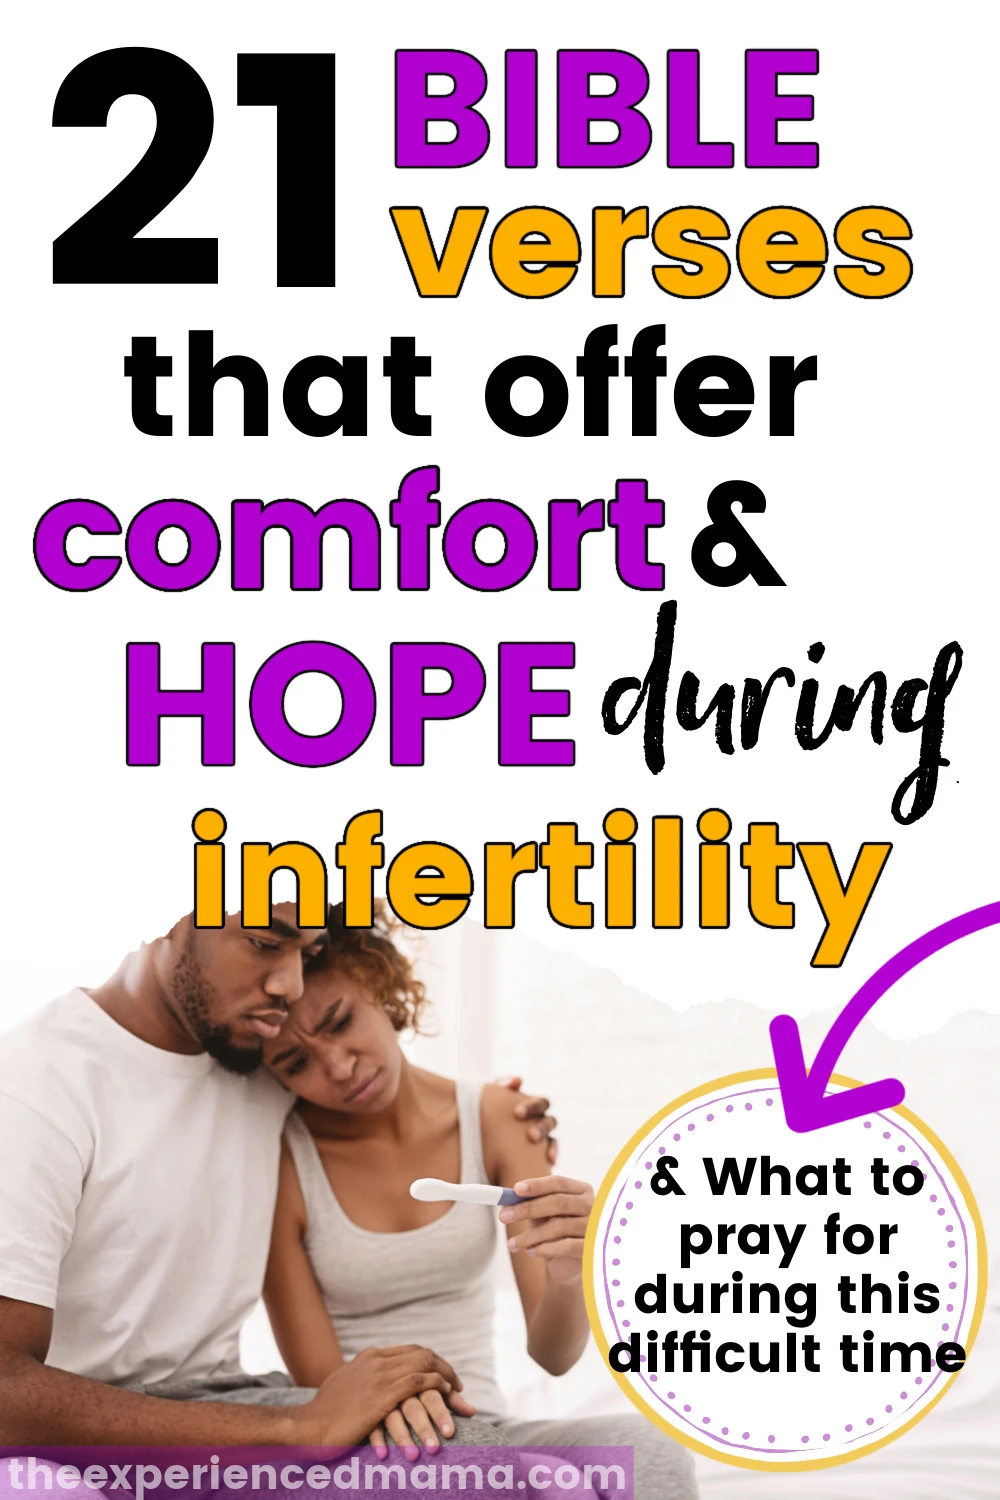 couple devastated by negative pregnancy test and infertility, with text overlay, "21 bible verses that offer comfort and hope during infertility"